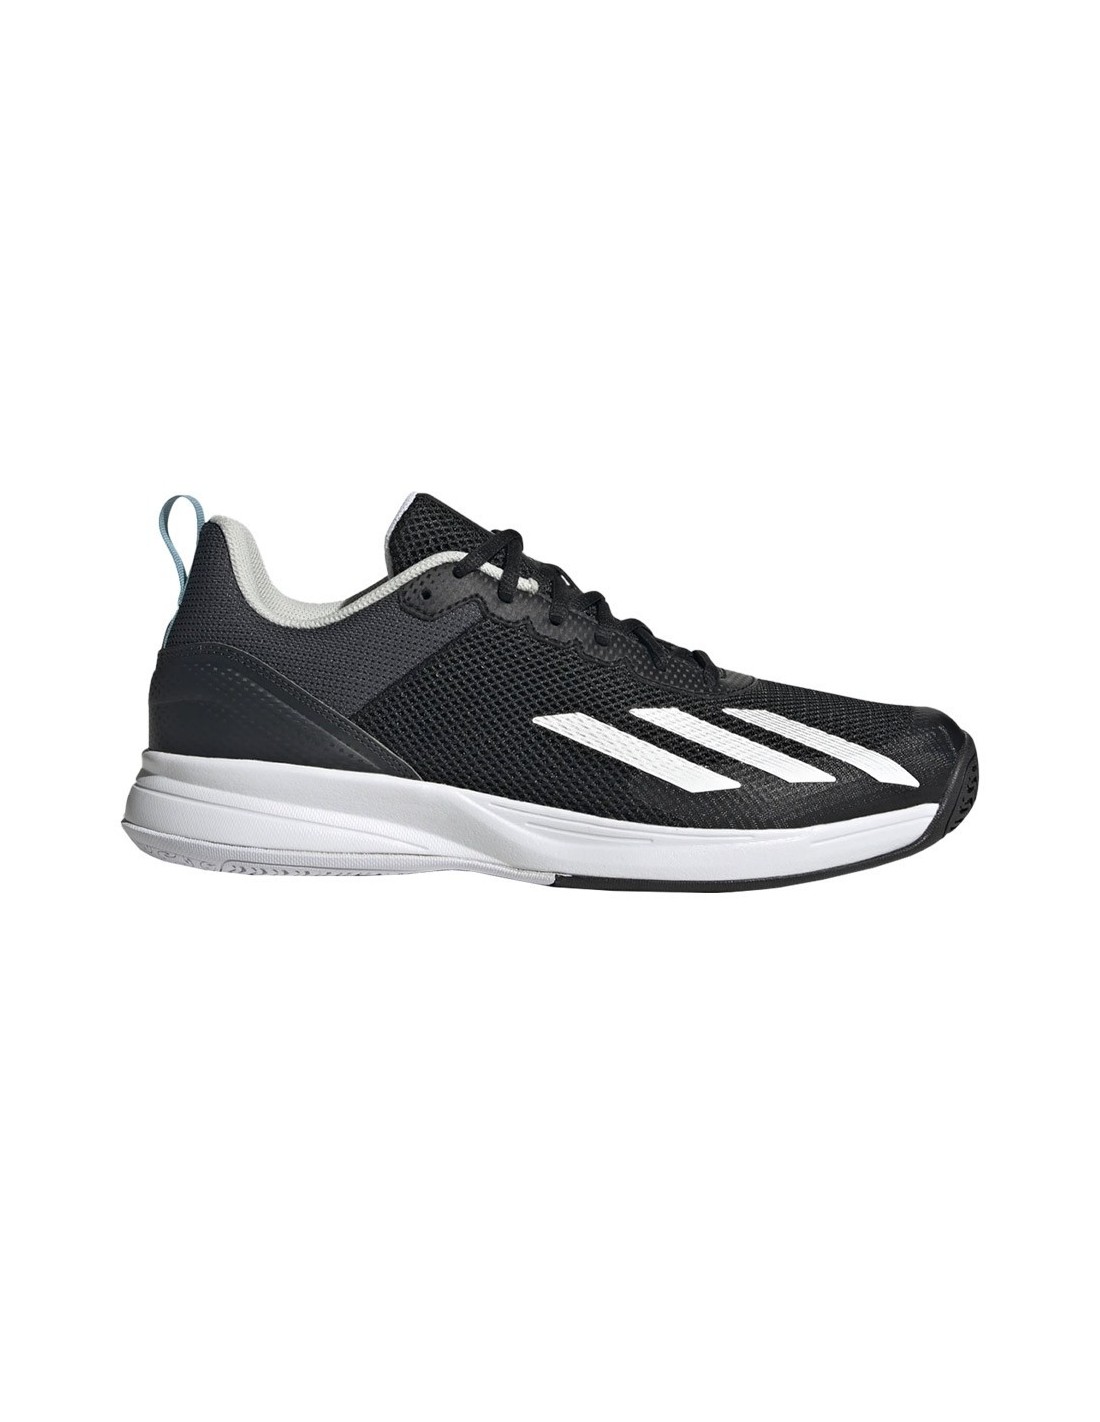 Adidas Courtflash Speed Shoes Hq8482 | Pendiente clasificar | Time2...